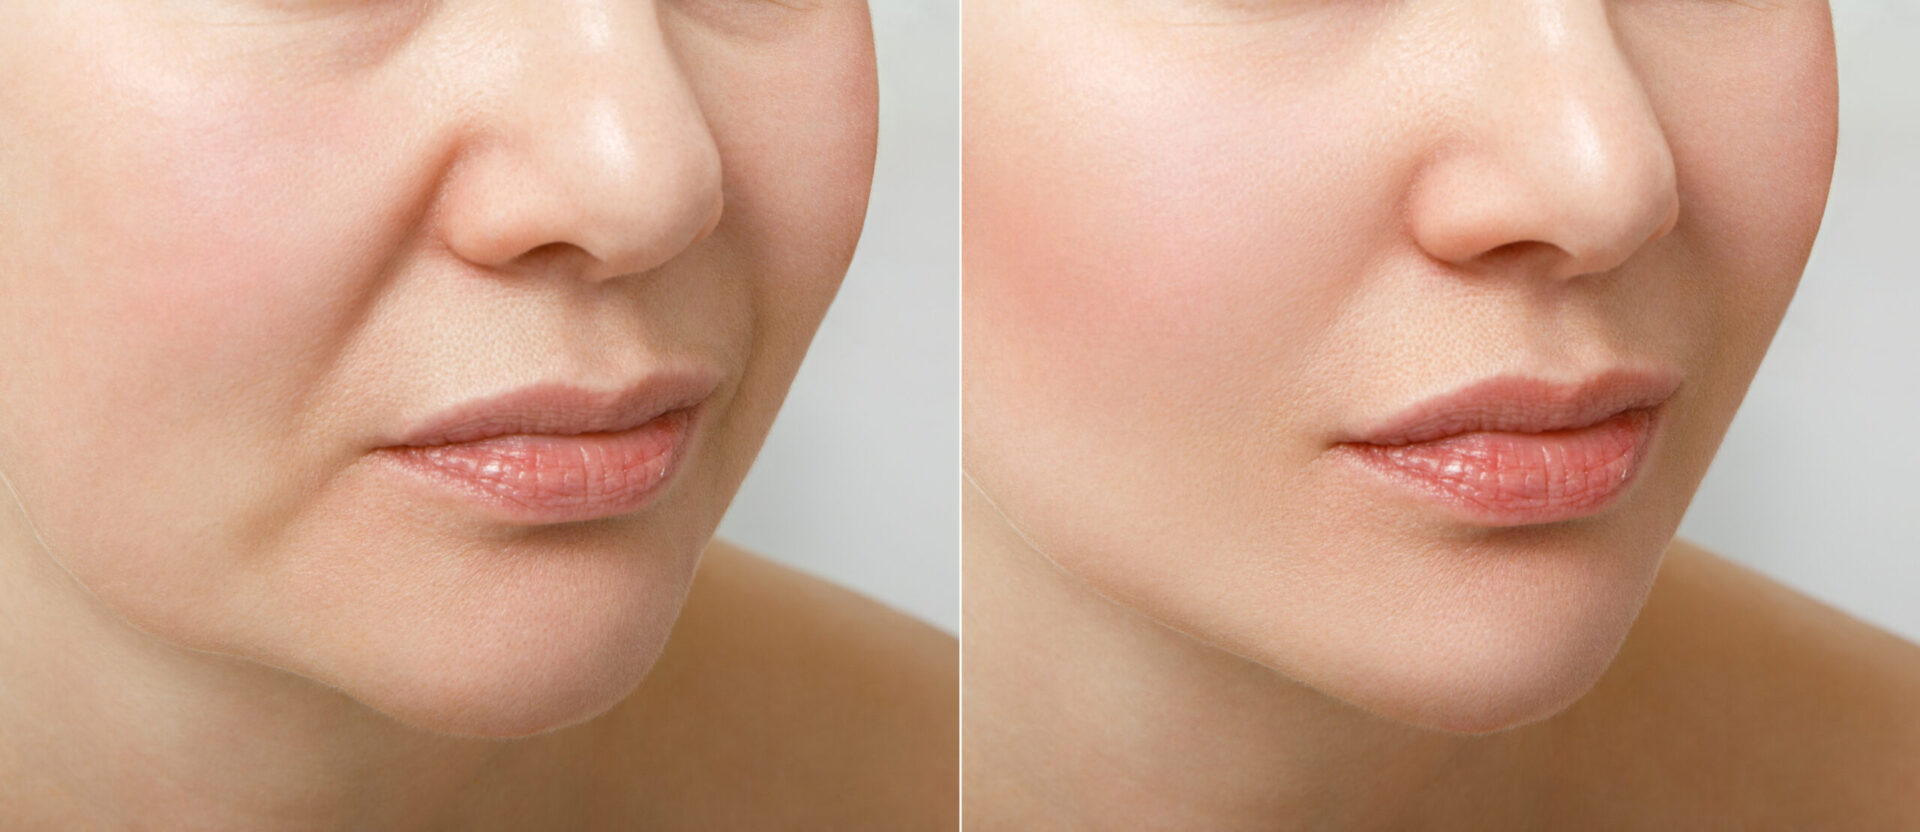 before your facelift procedure information provided by Aspire Surgical in the Salt Lake City, UT area